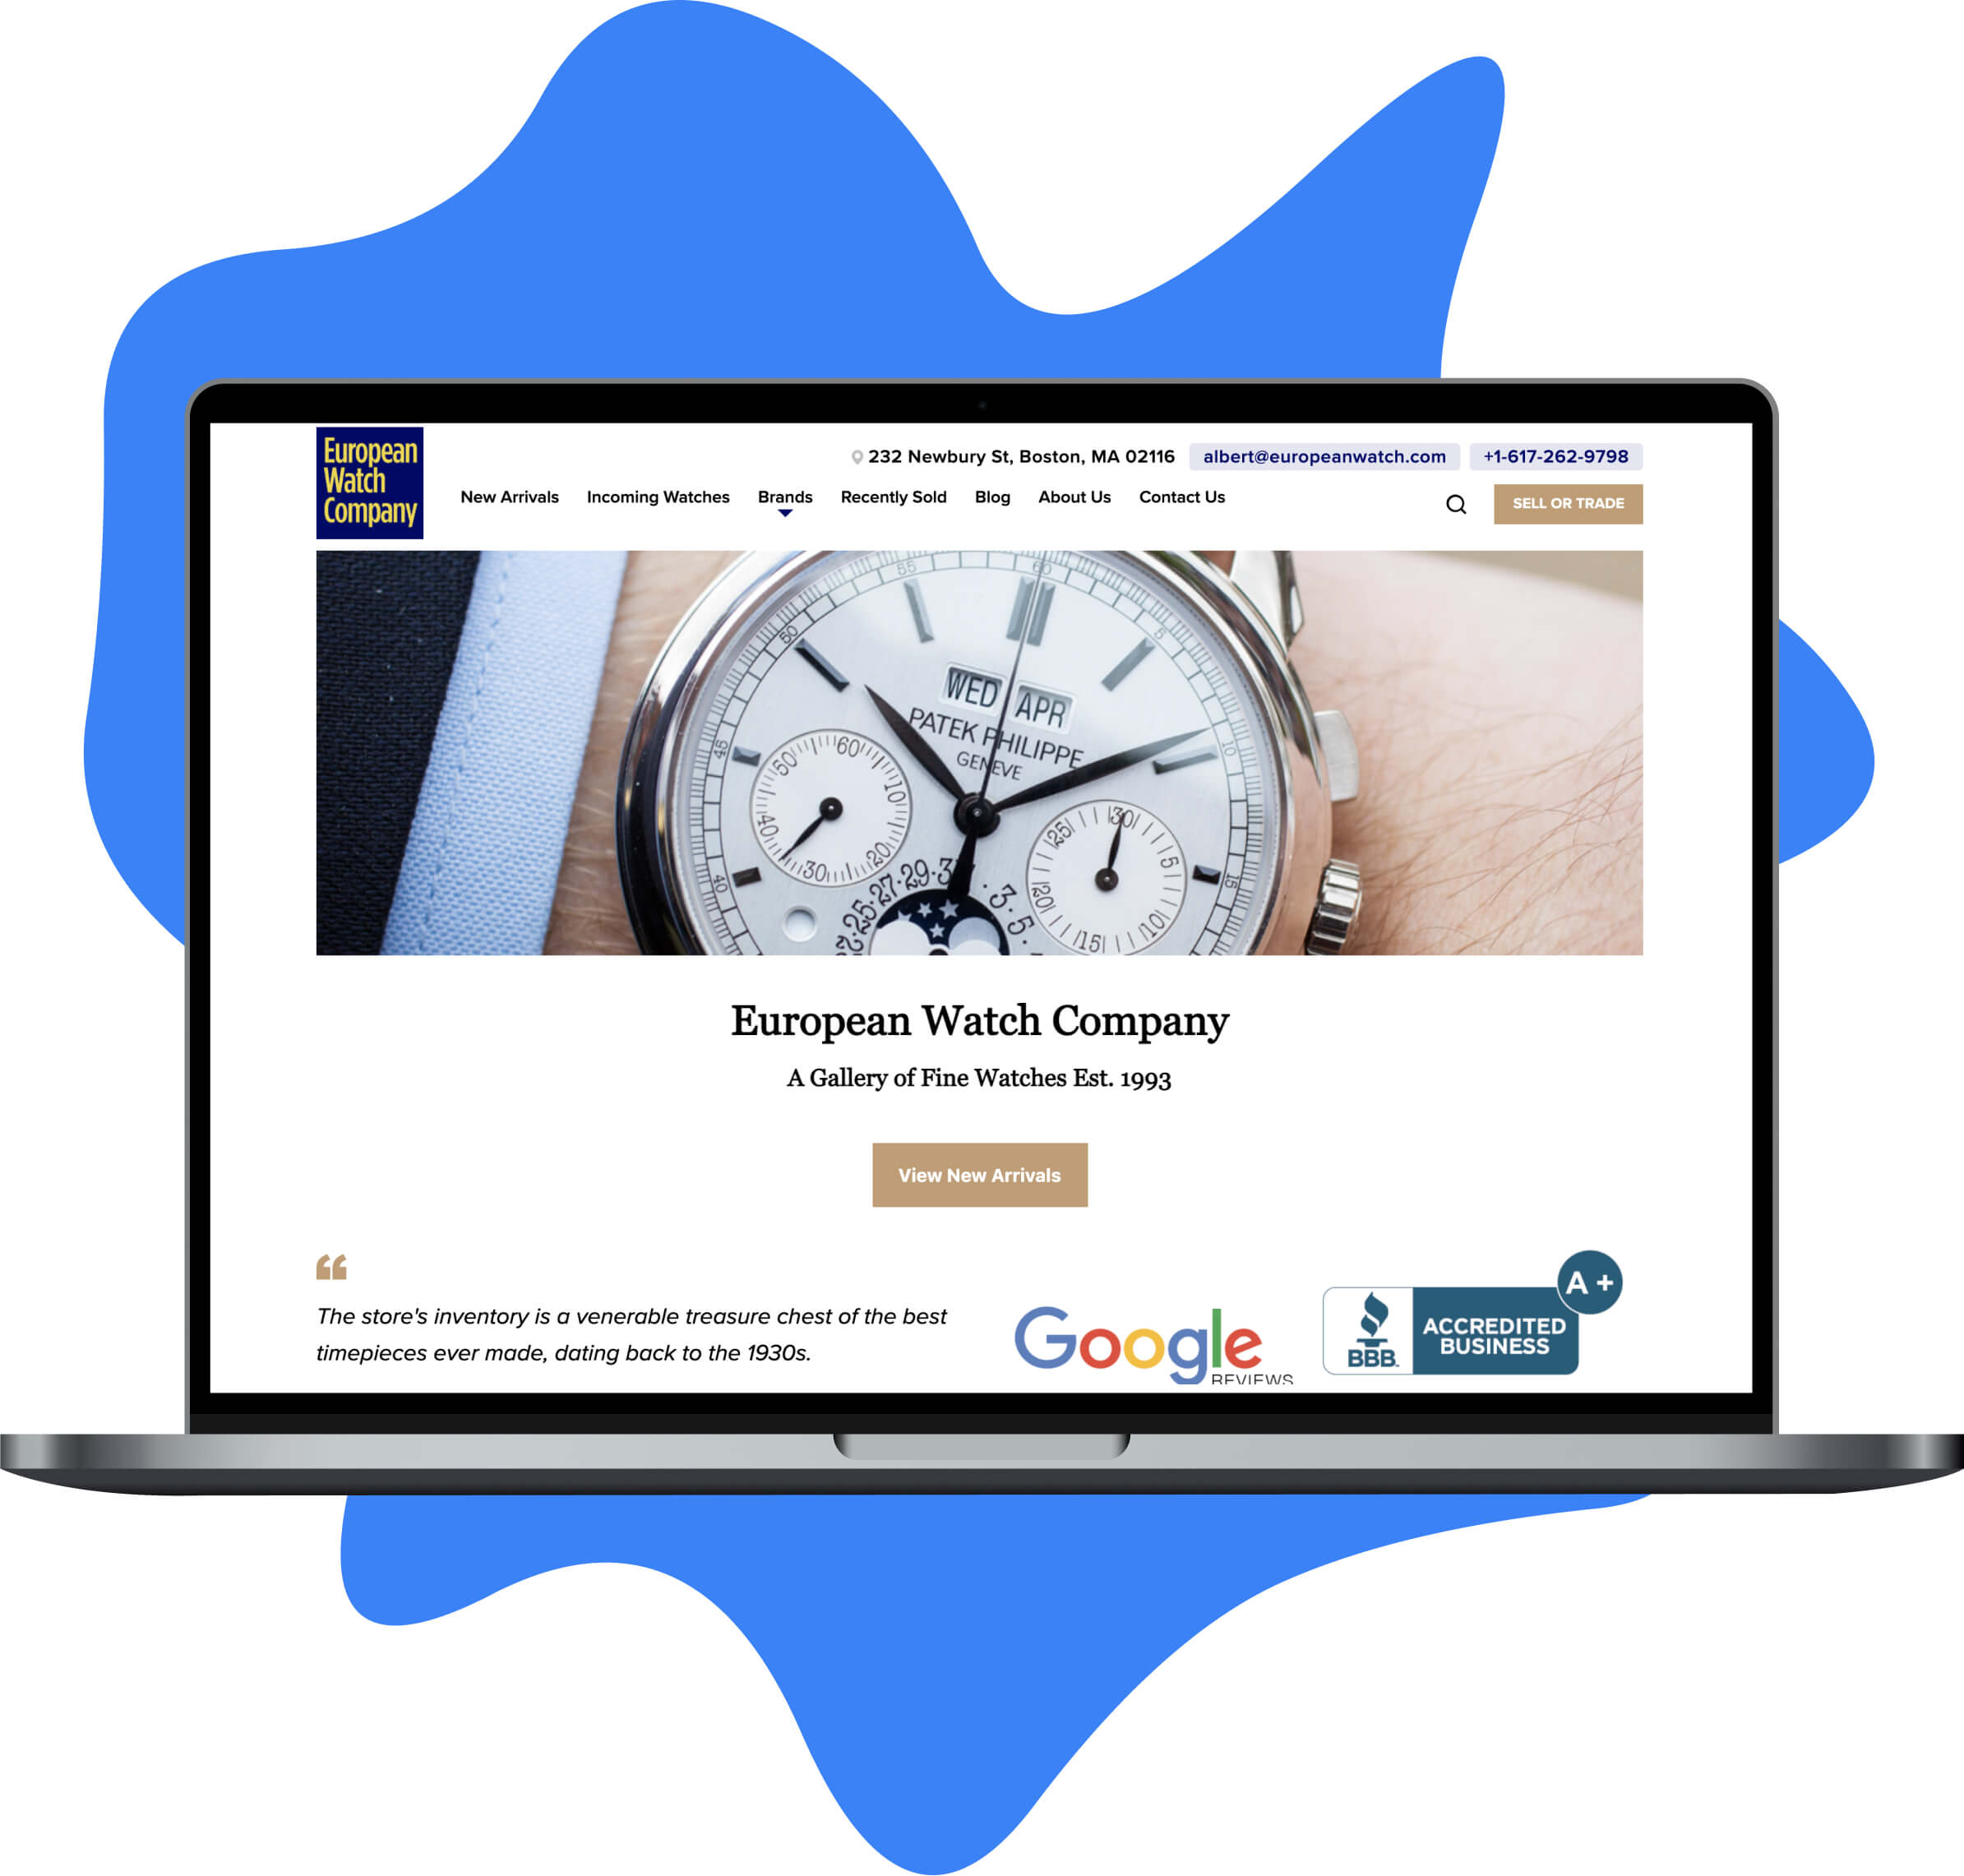 European Watch Company's Home page where Matt Basile works as a Frontend Engineer